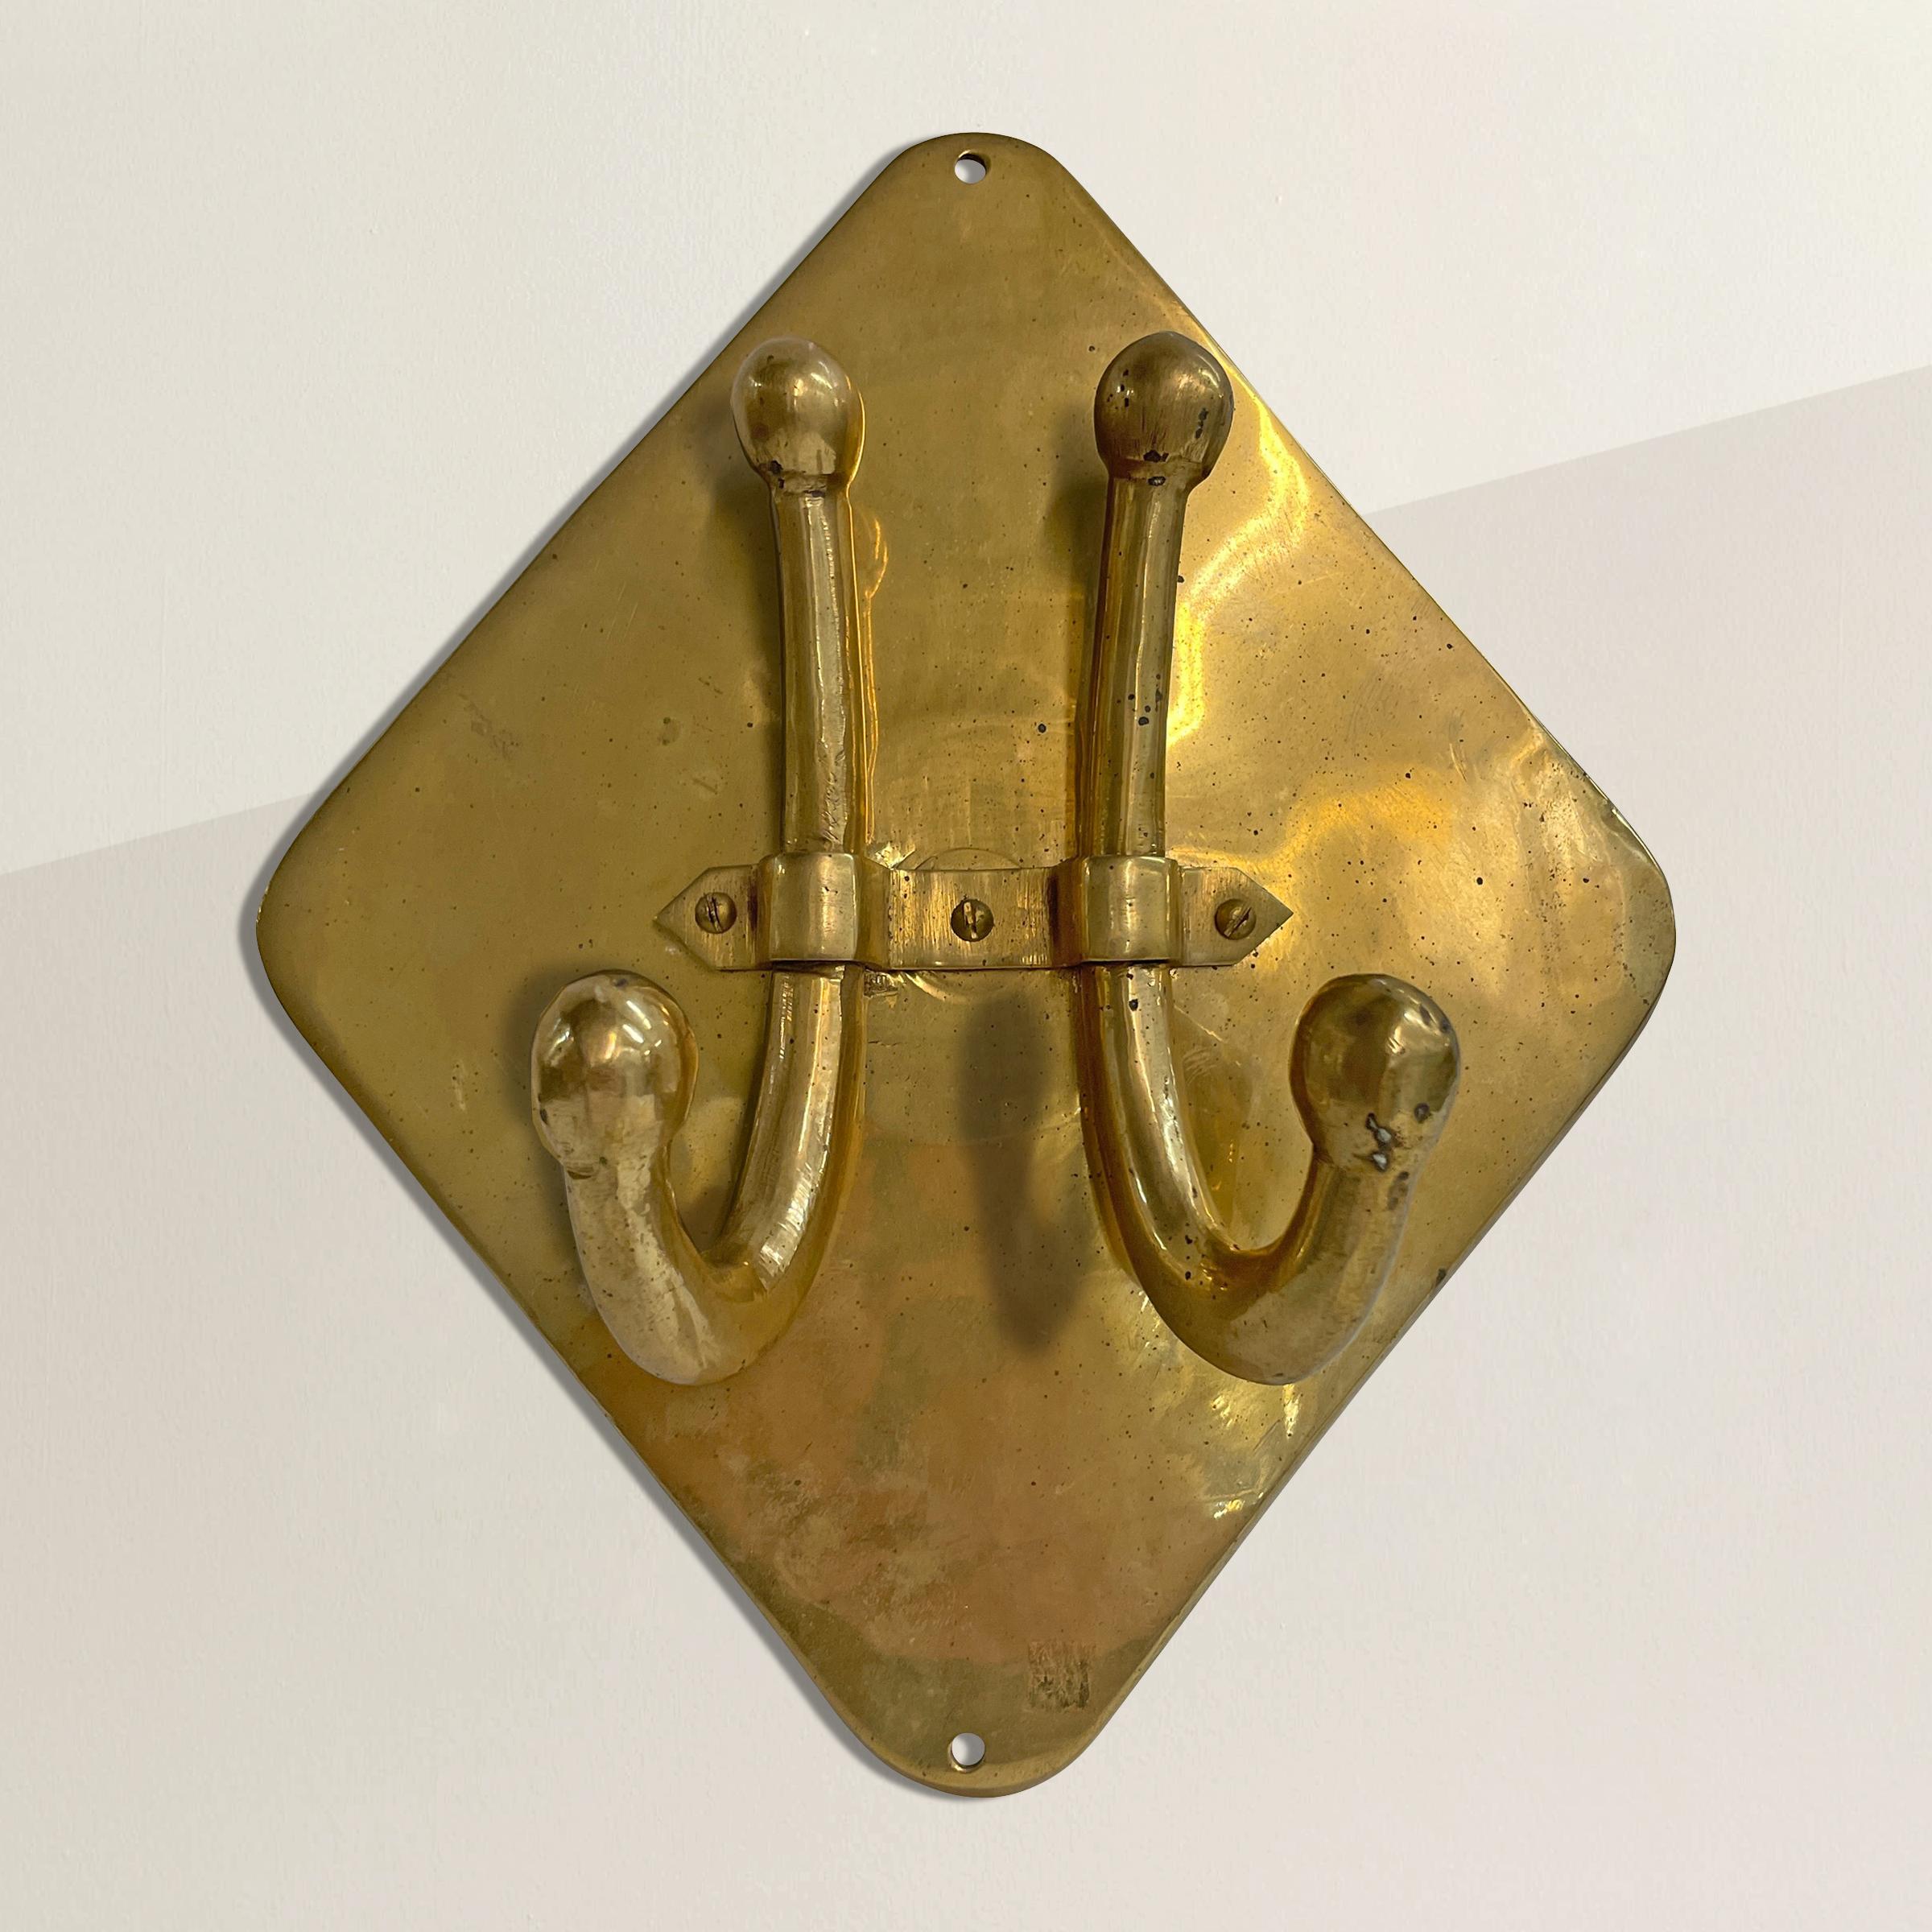 A beautiful early 20th century English brass wall-mounted coat and hat hook with two large hooks mounted to a diamond wall plate.